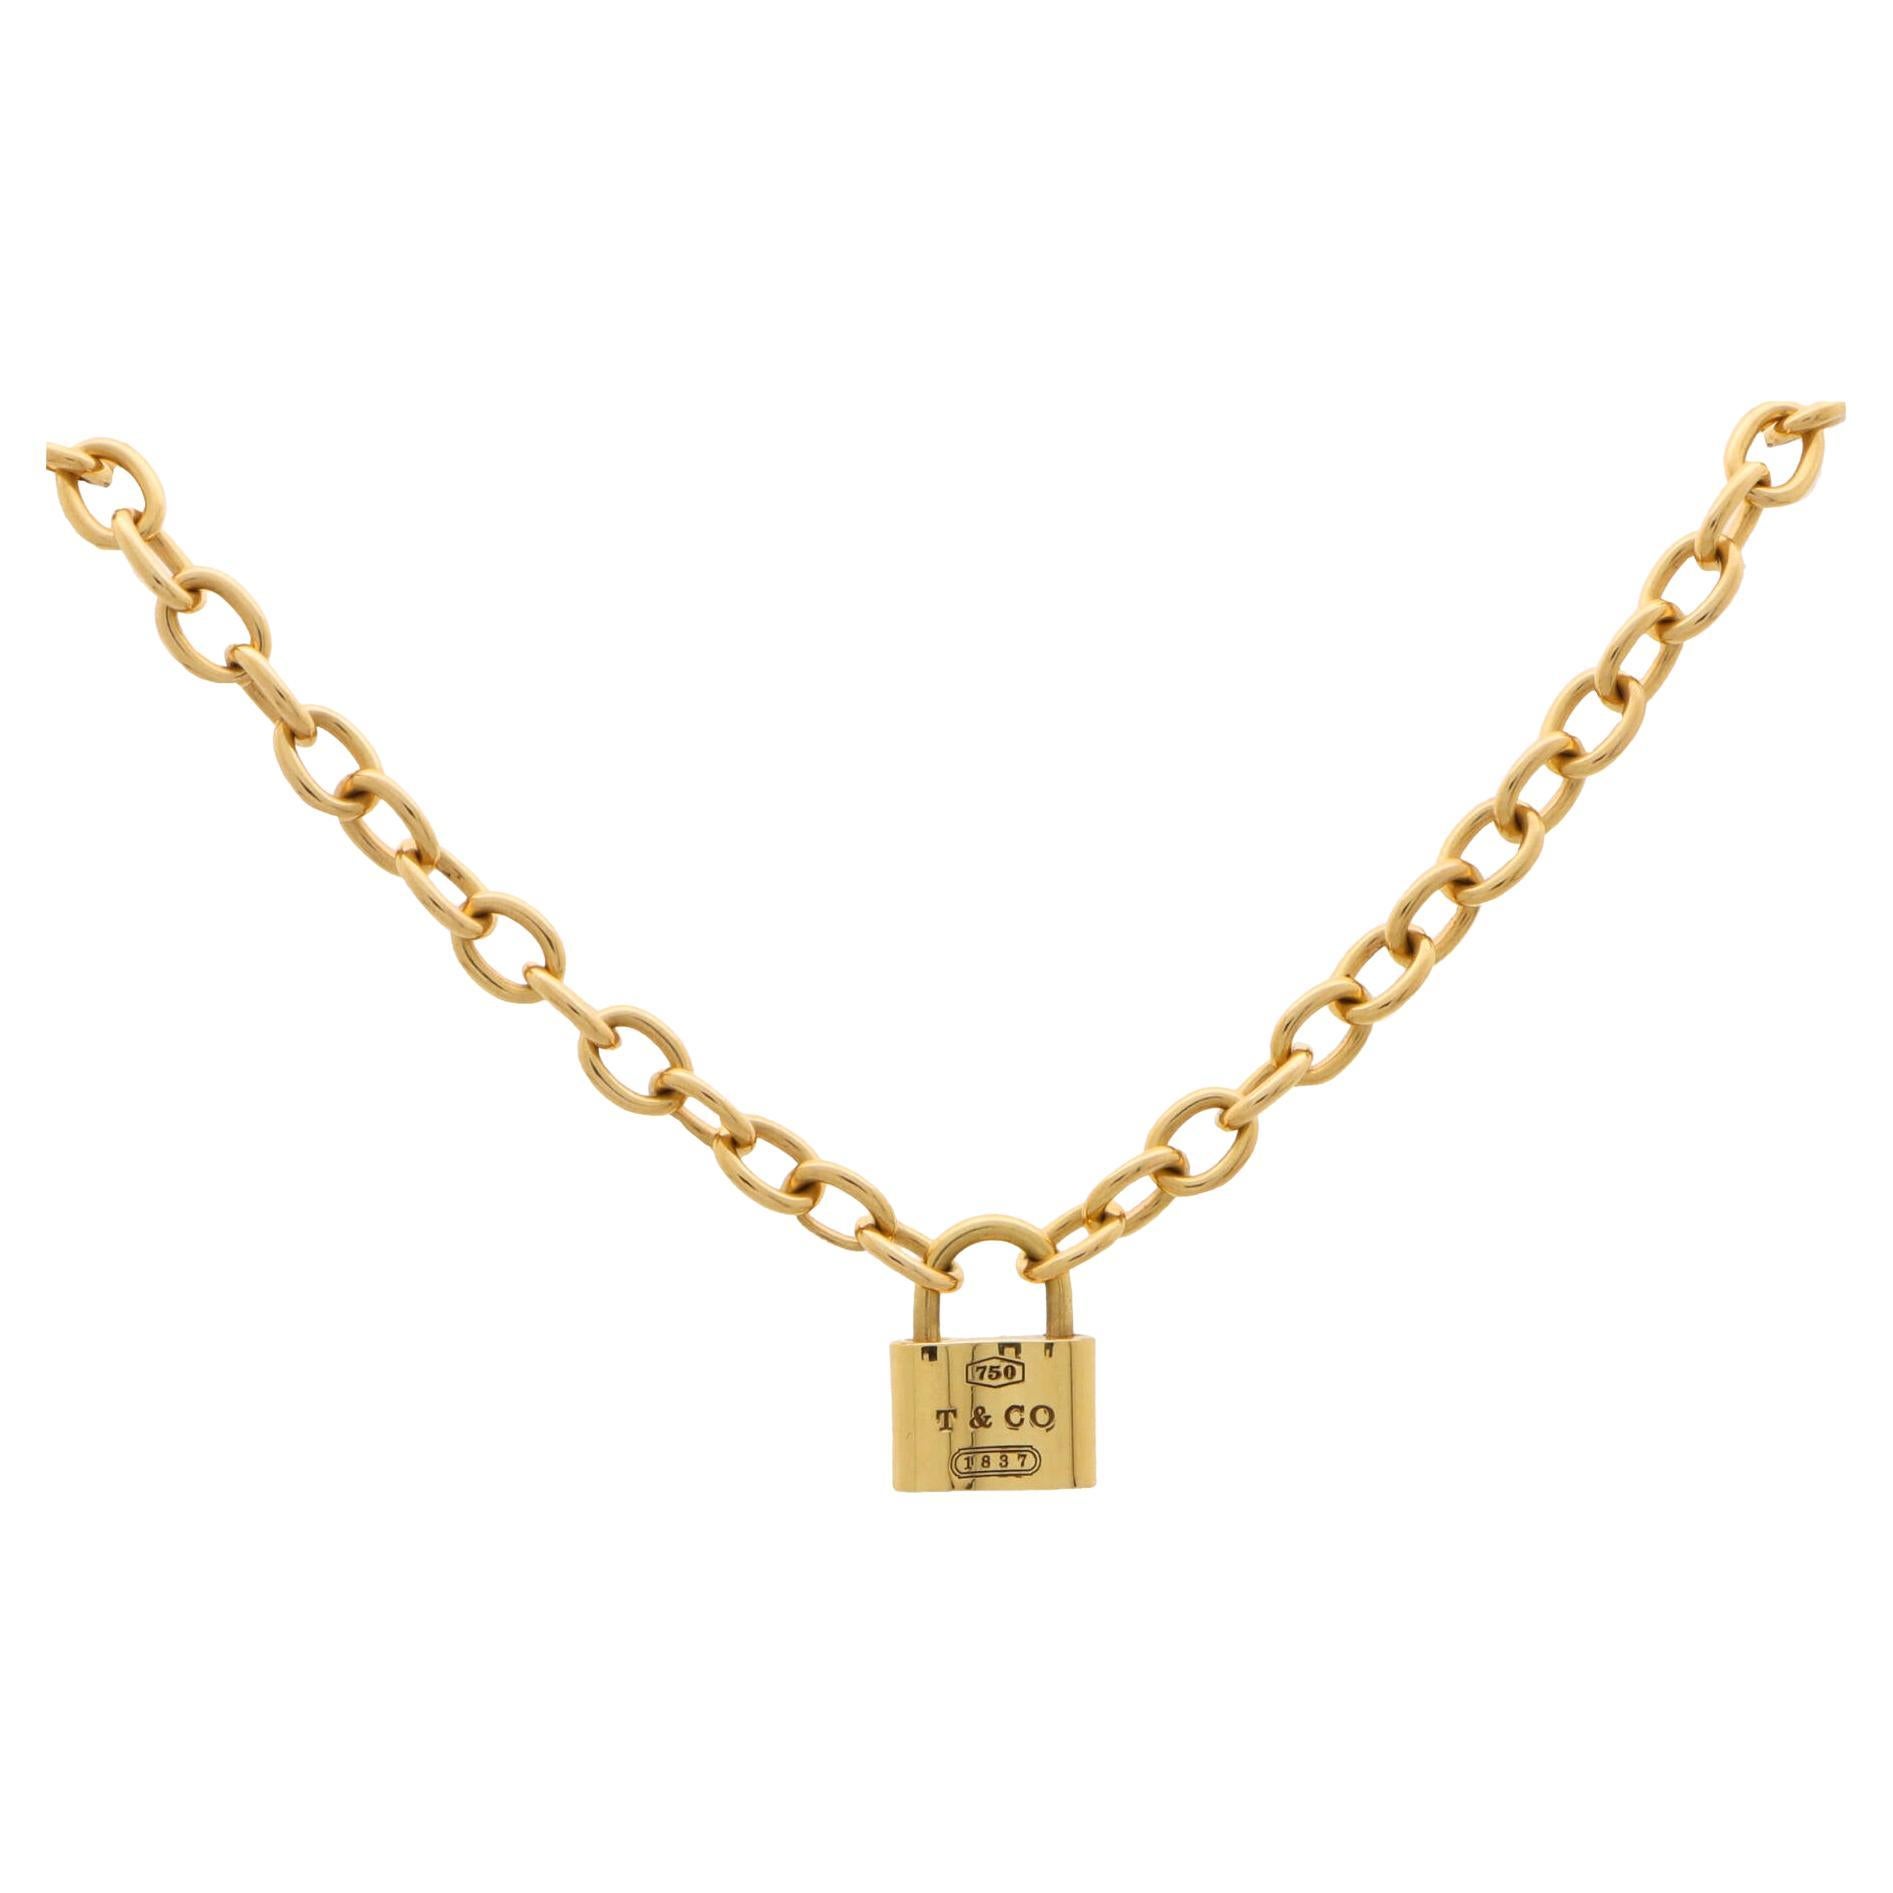 Vintage Tiffany & Co Padlock Necklace in 18k Yellow Gold